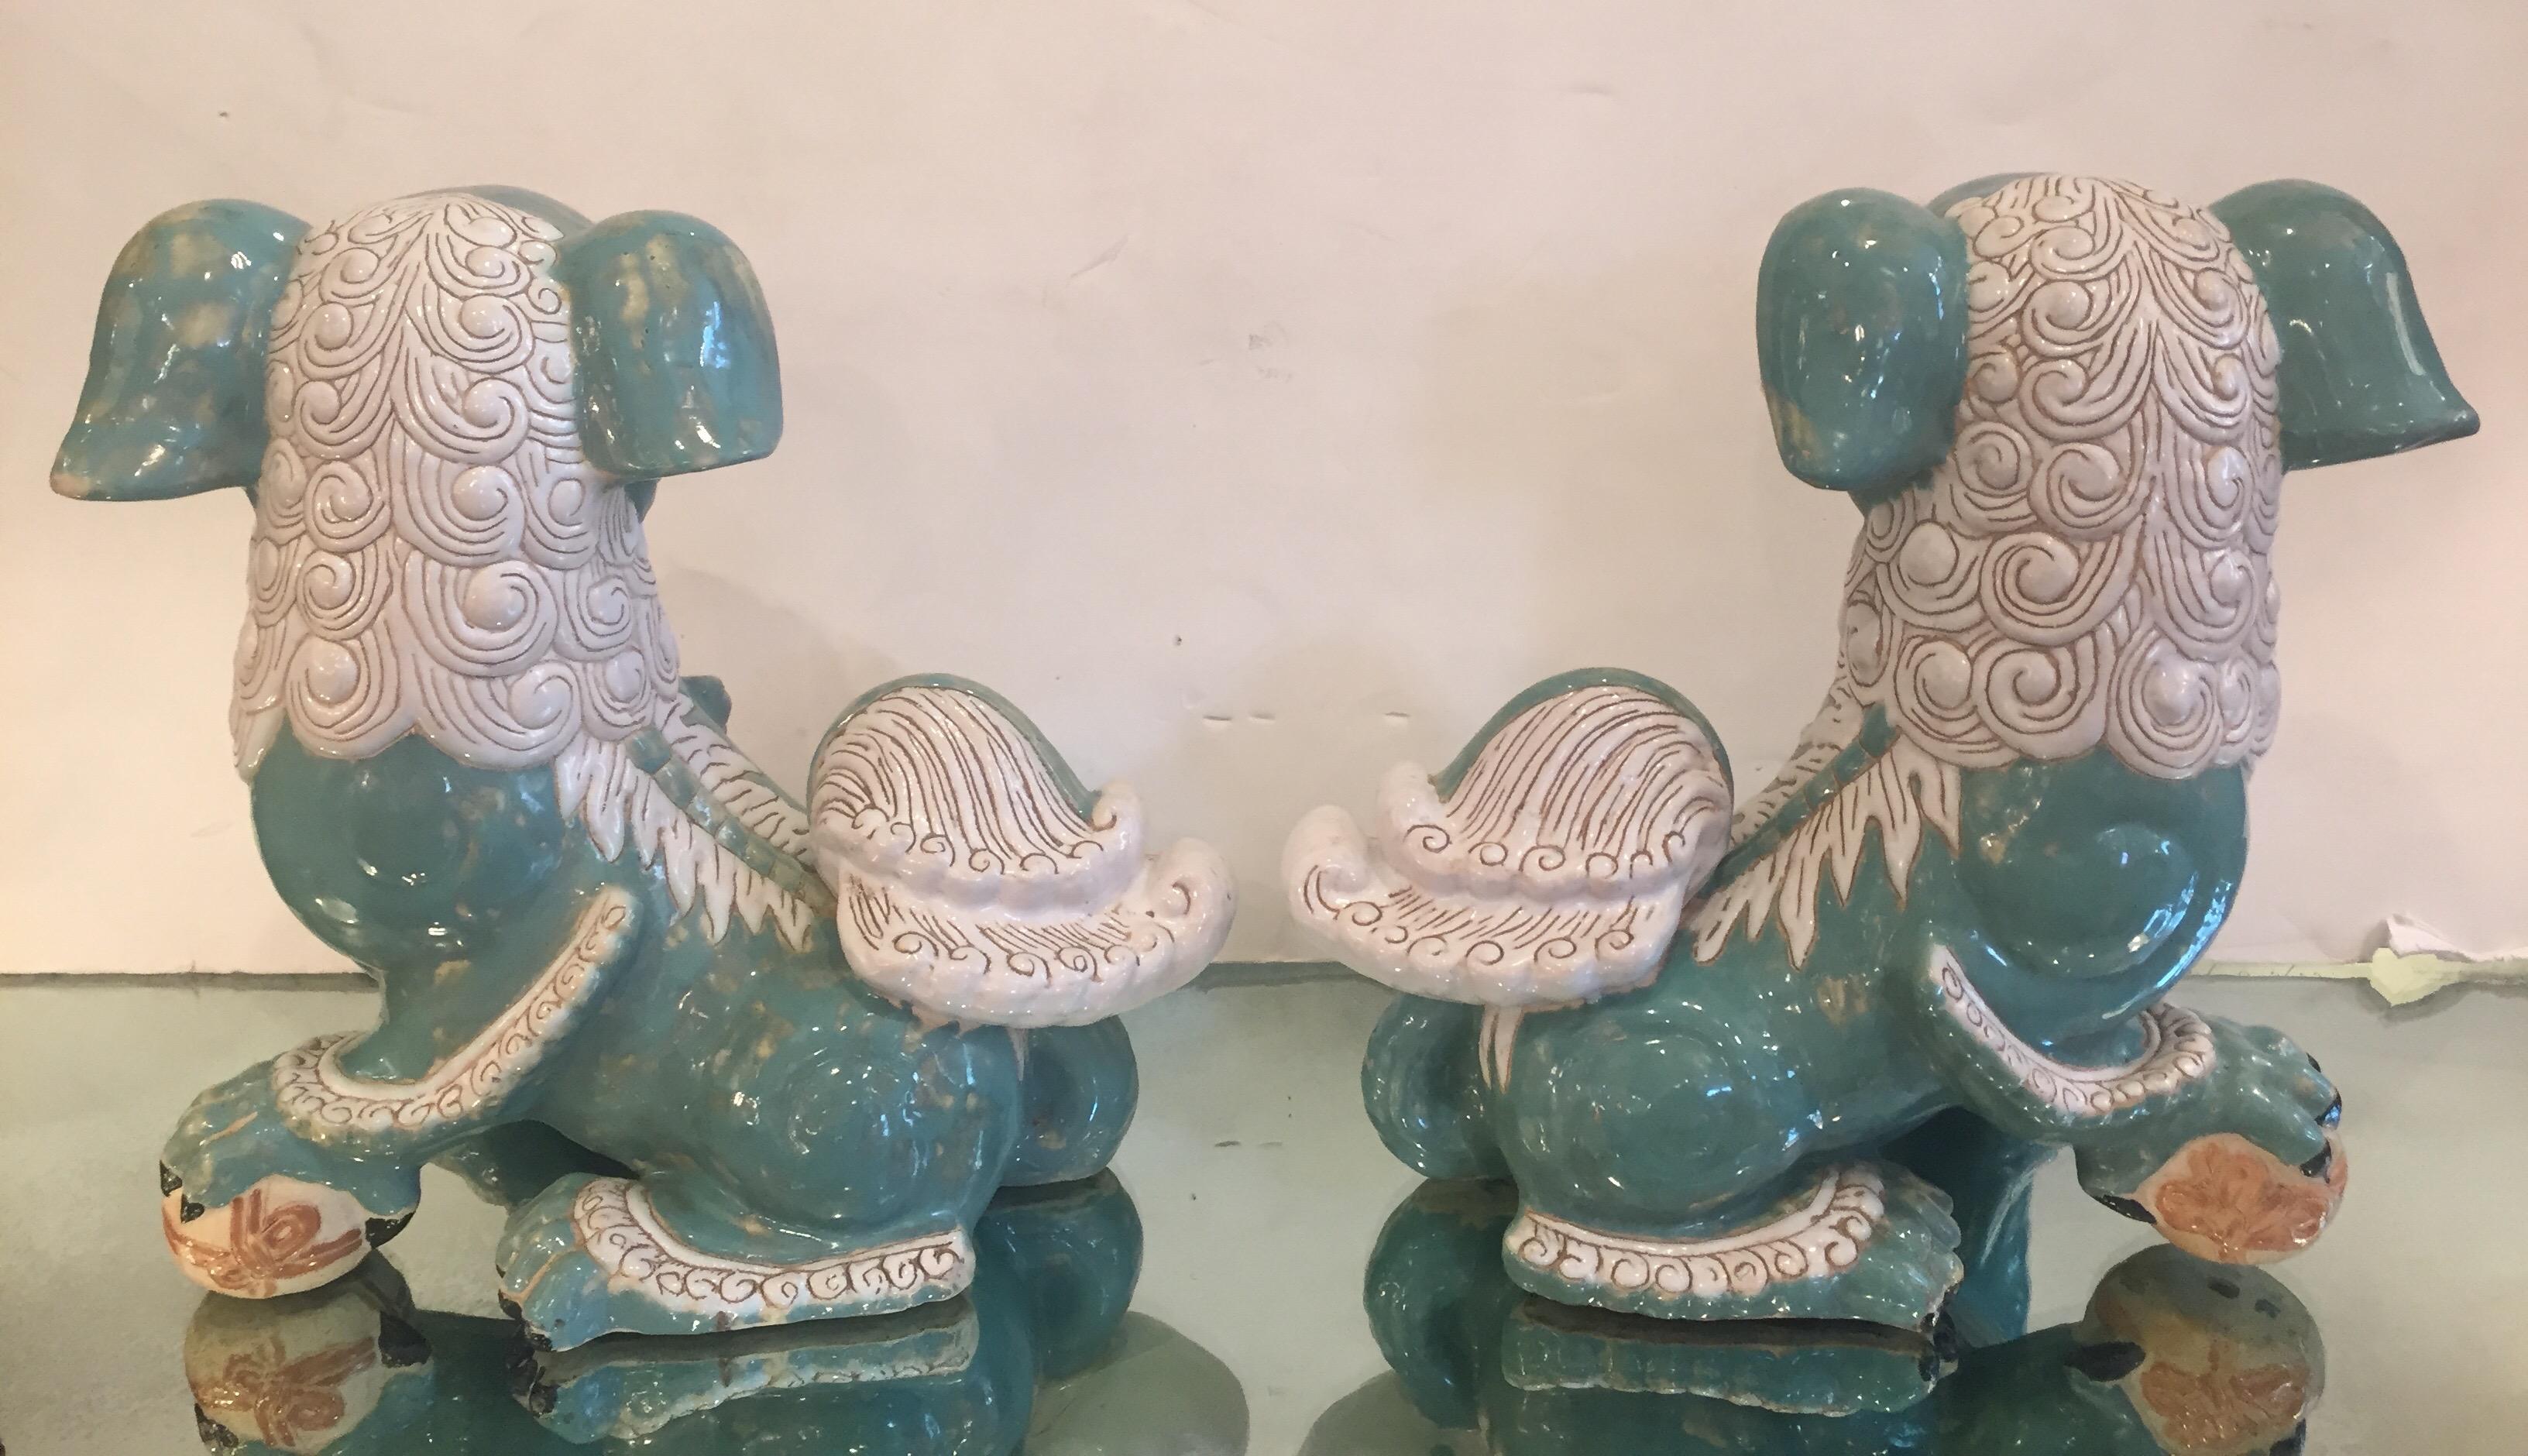 A stylish and large pair of Chinese ceramic foo dogs with wings in a lovely color palette of soft turquoise and cream.